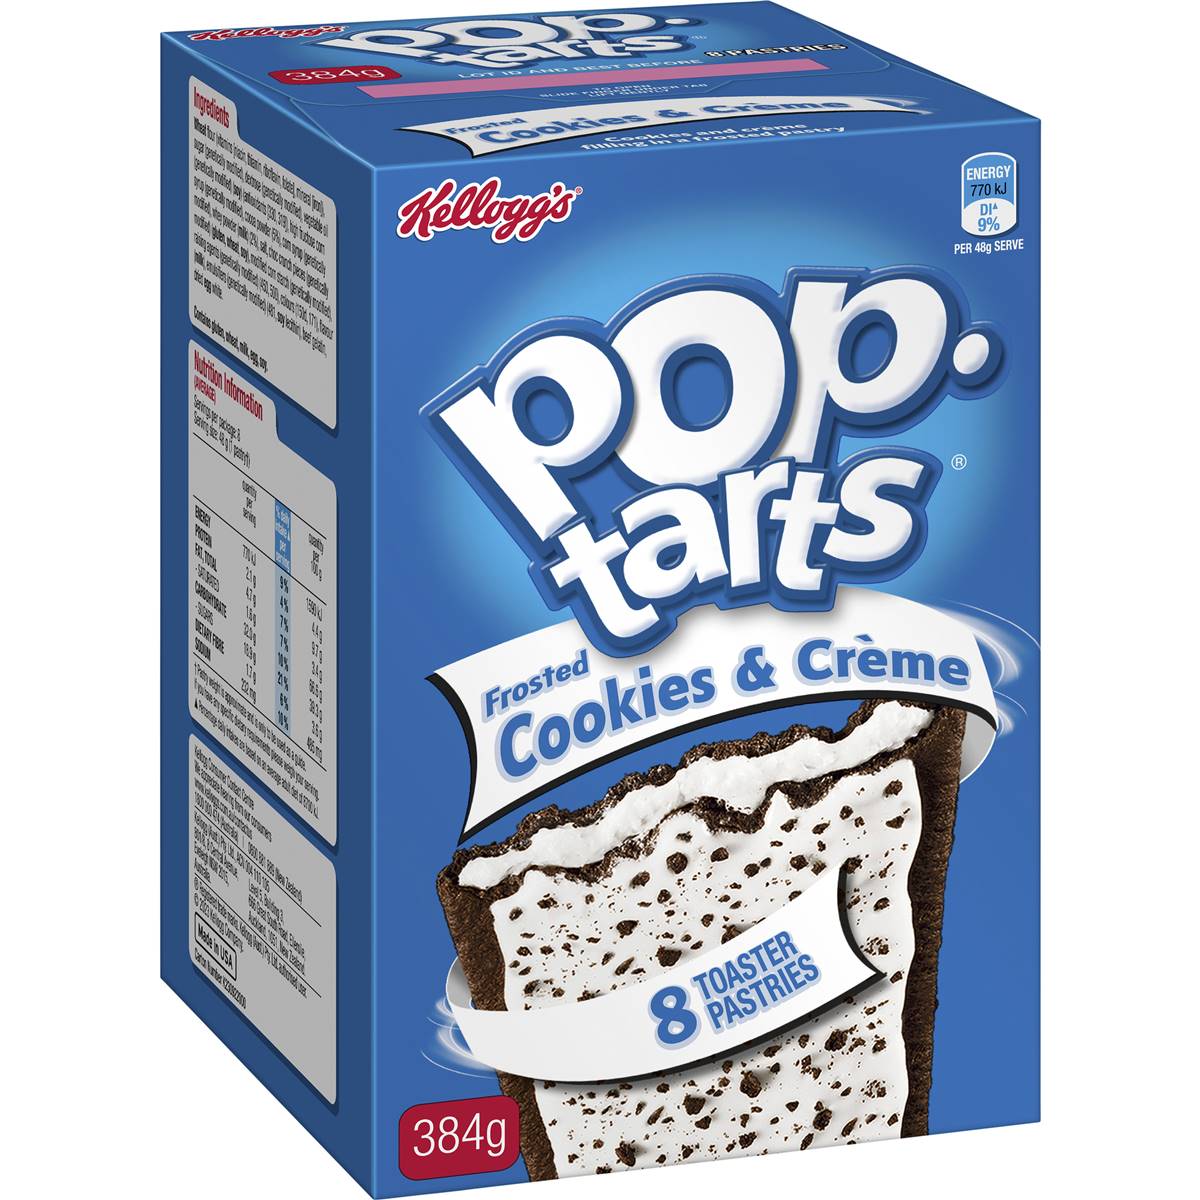 Calories in Kellogg's Pop Tarts Frosted Cookies & CrÃ¨me Toaster Pastries